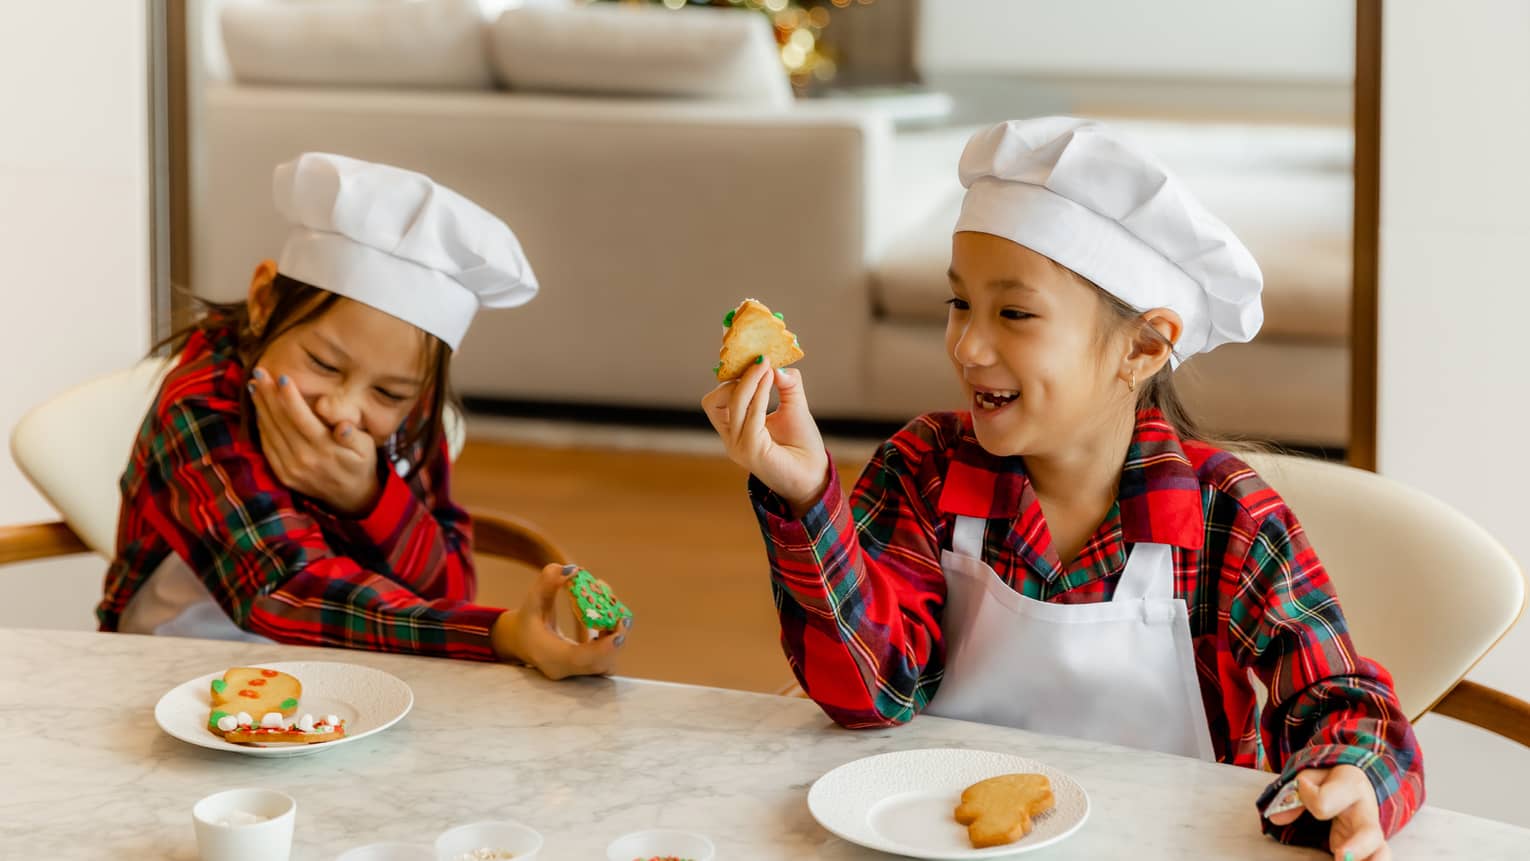 Two young children making cookies.